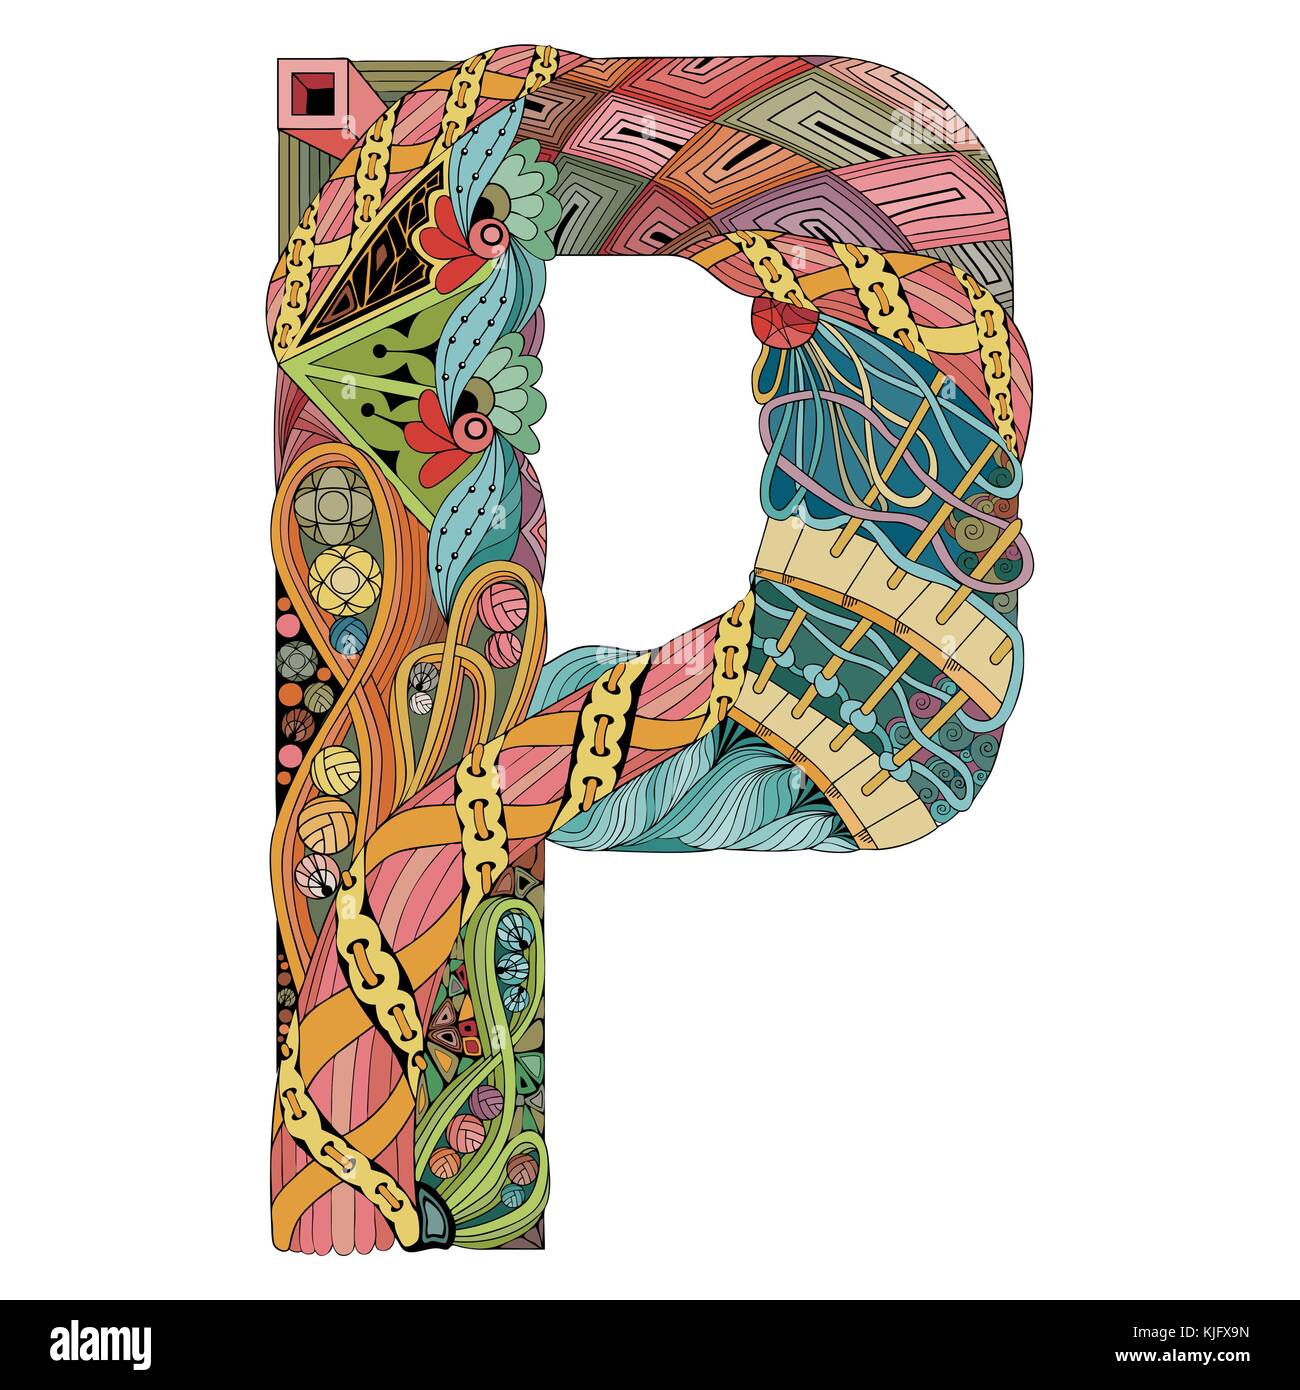 Top 90+ Background Images Images Of The Letter P Full HD, 2k, 4k